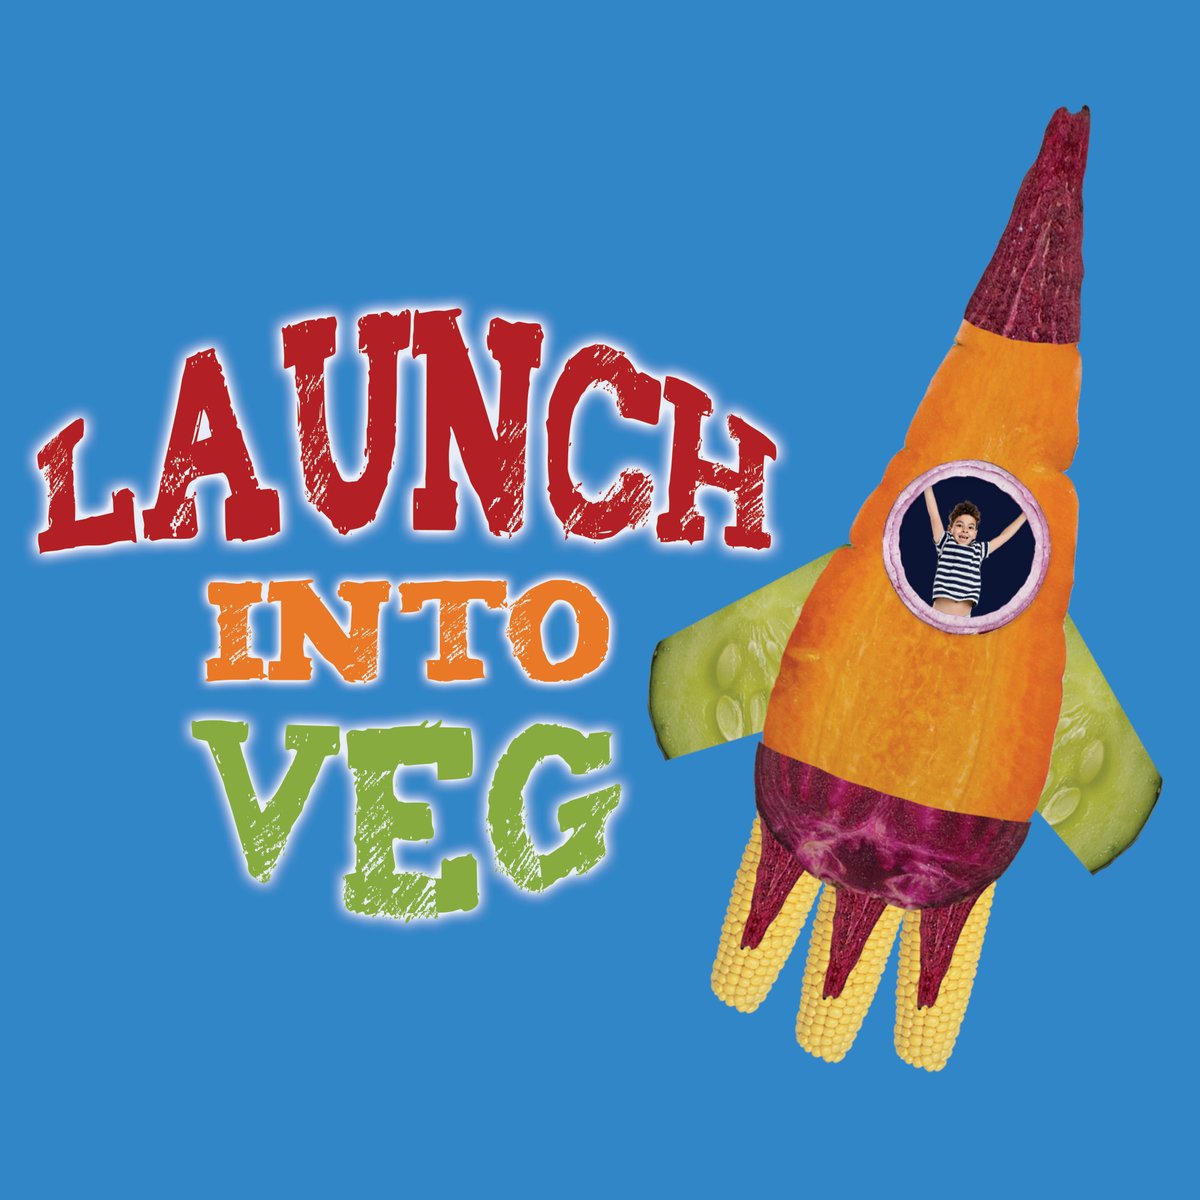 Do you have parents/carers in your community who have kids who eat little to no veg? We have a FREE course to guide them through 7 simple steps to helping their child eat one more veg by the end. Sign up here: simplyveglearning.org.uk